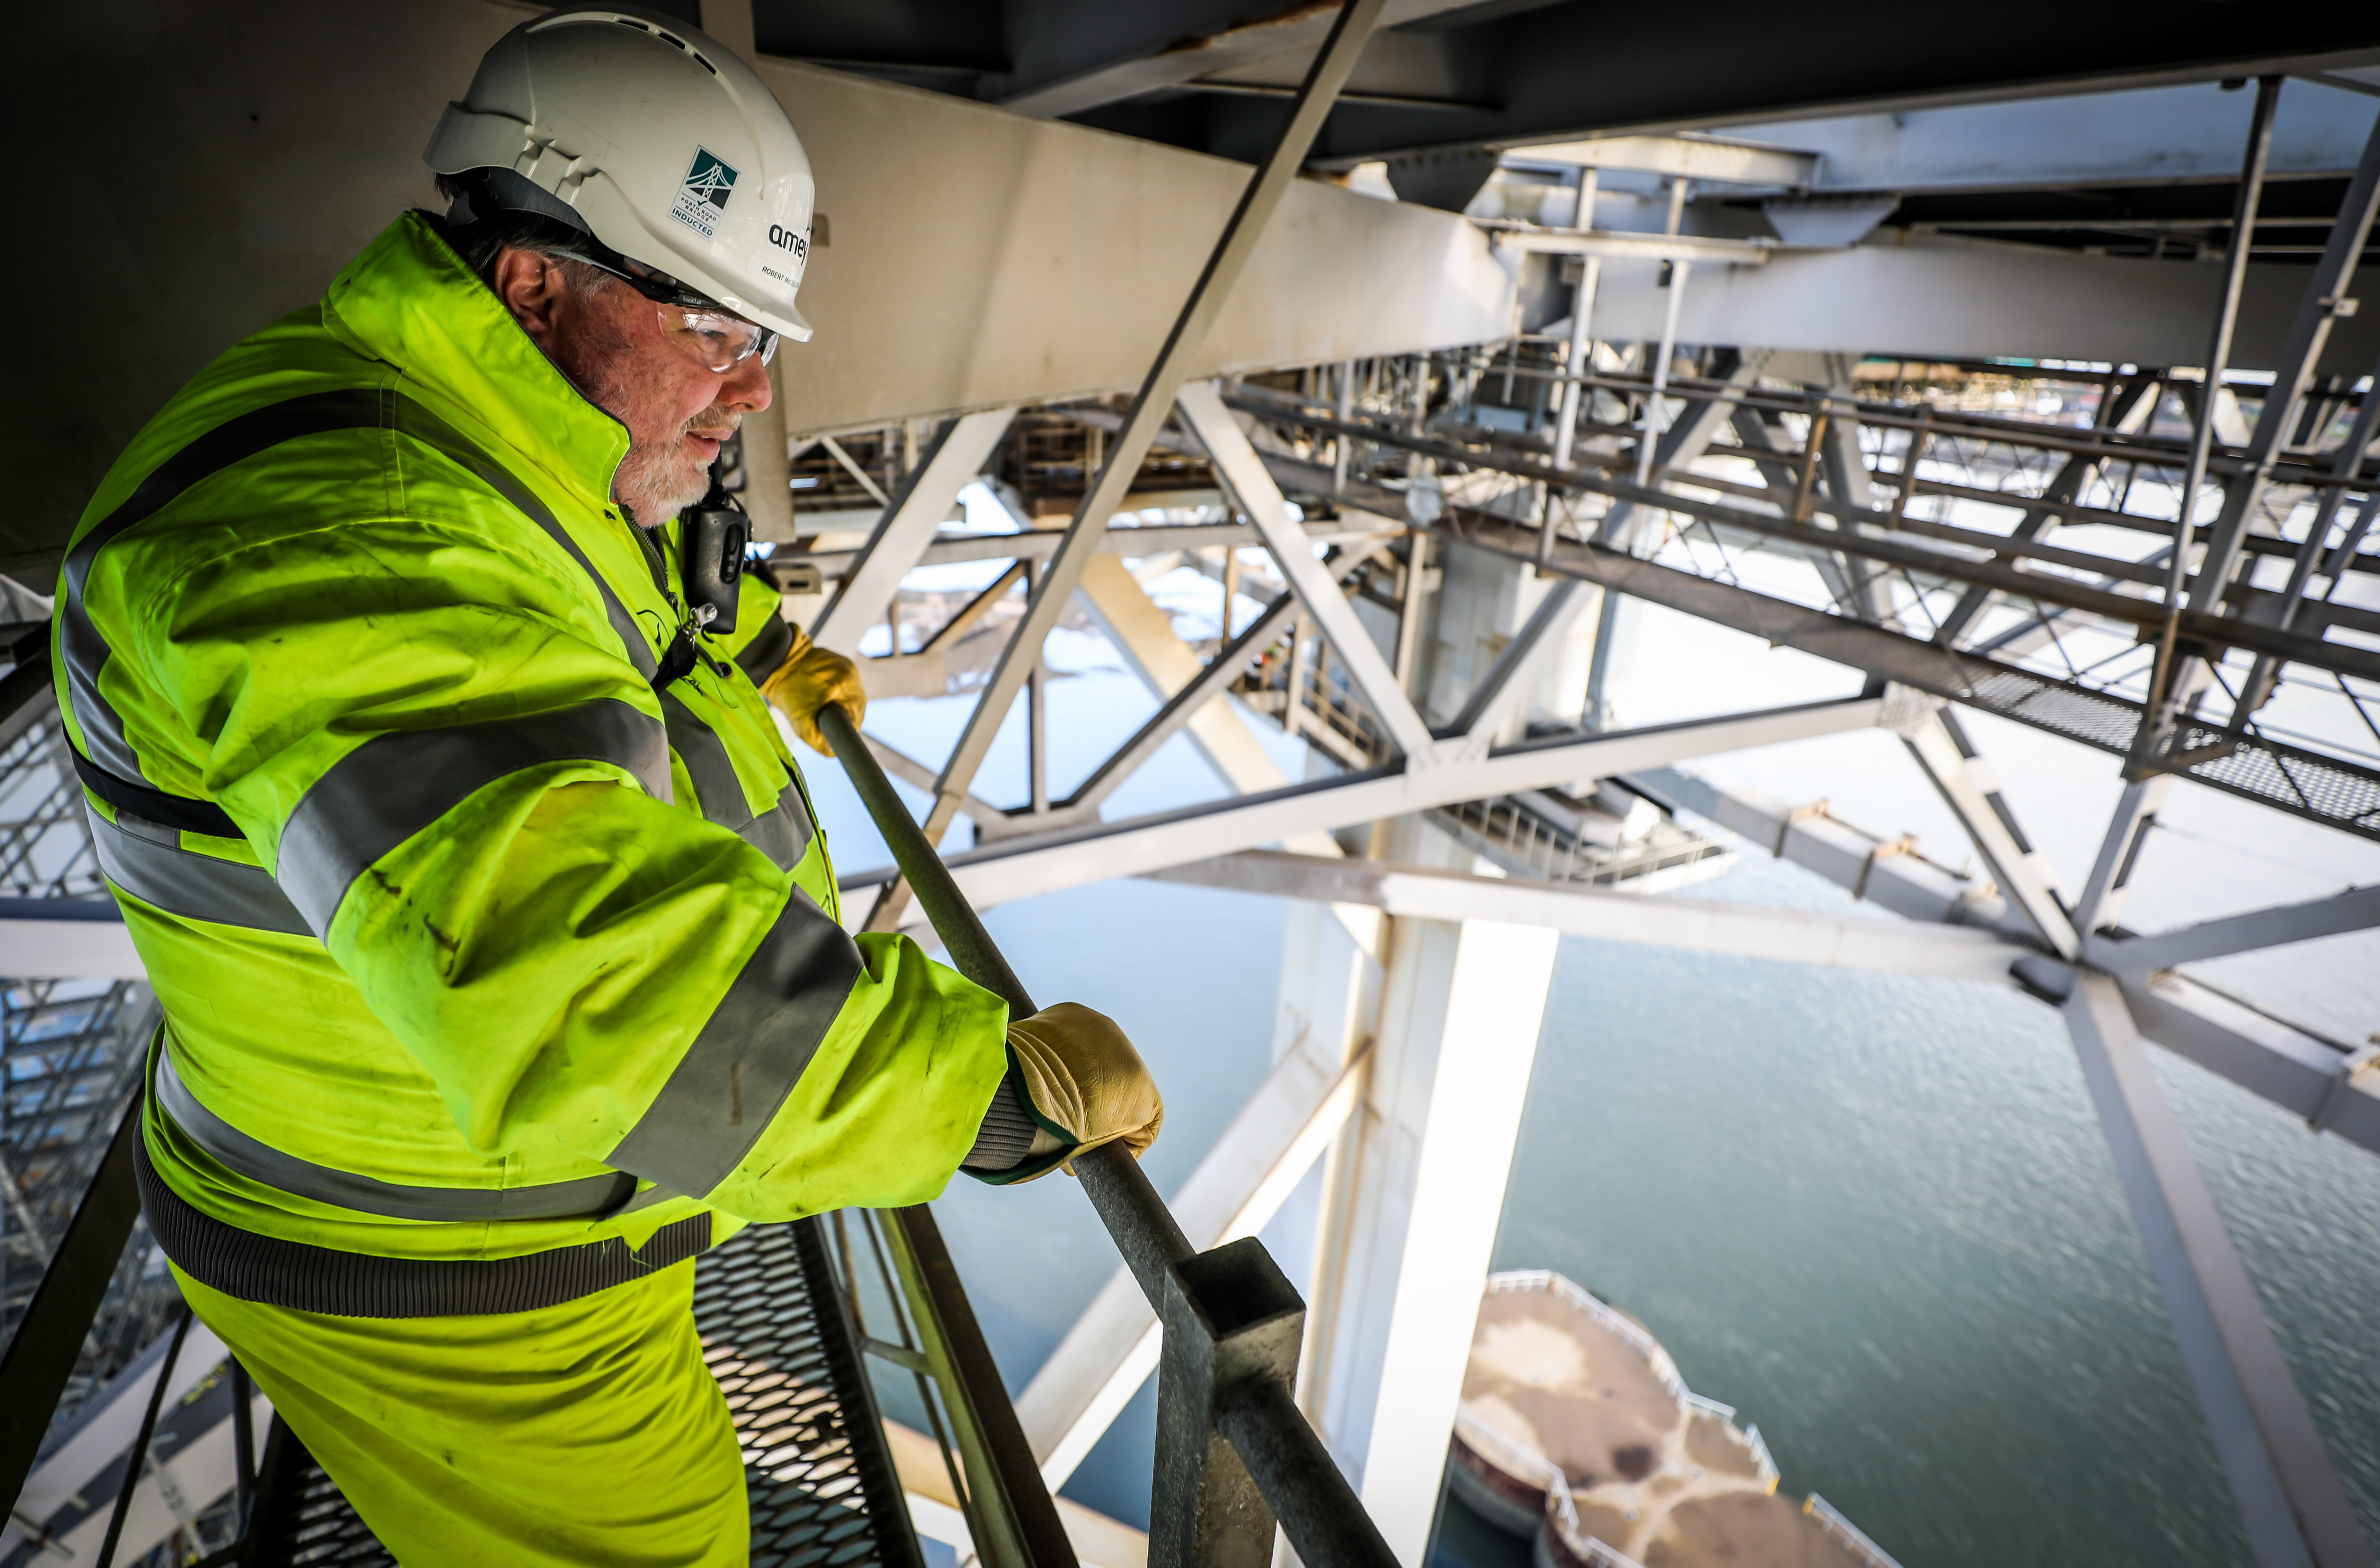 Robert McCulloch, Senior Civil Engineer in charge of  replacing expansion joints on the Forth Road bridge, on one of the underside gantries